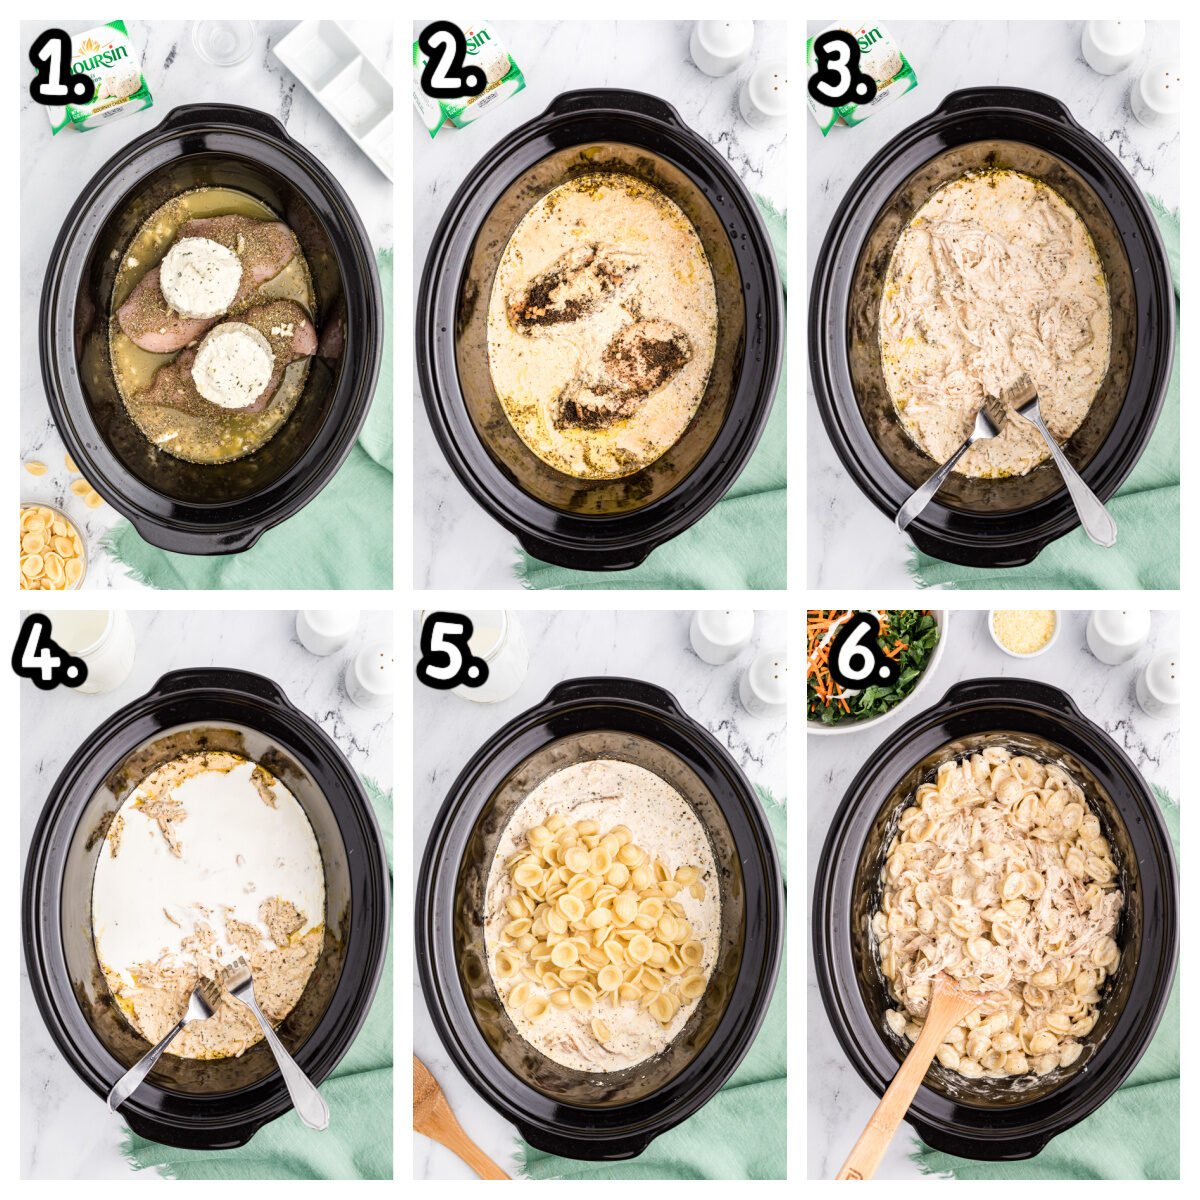 6 images showing how to assemble boursin cheese chicken pasta in slow cooker.